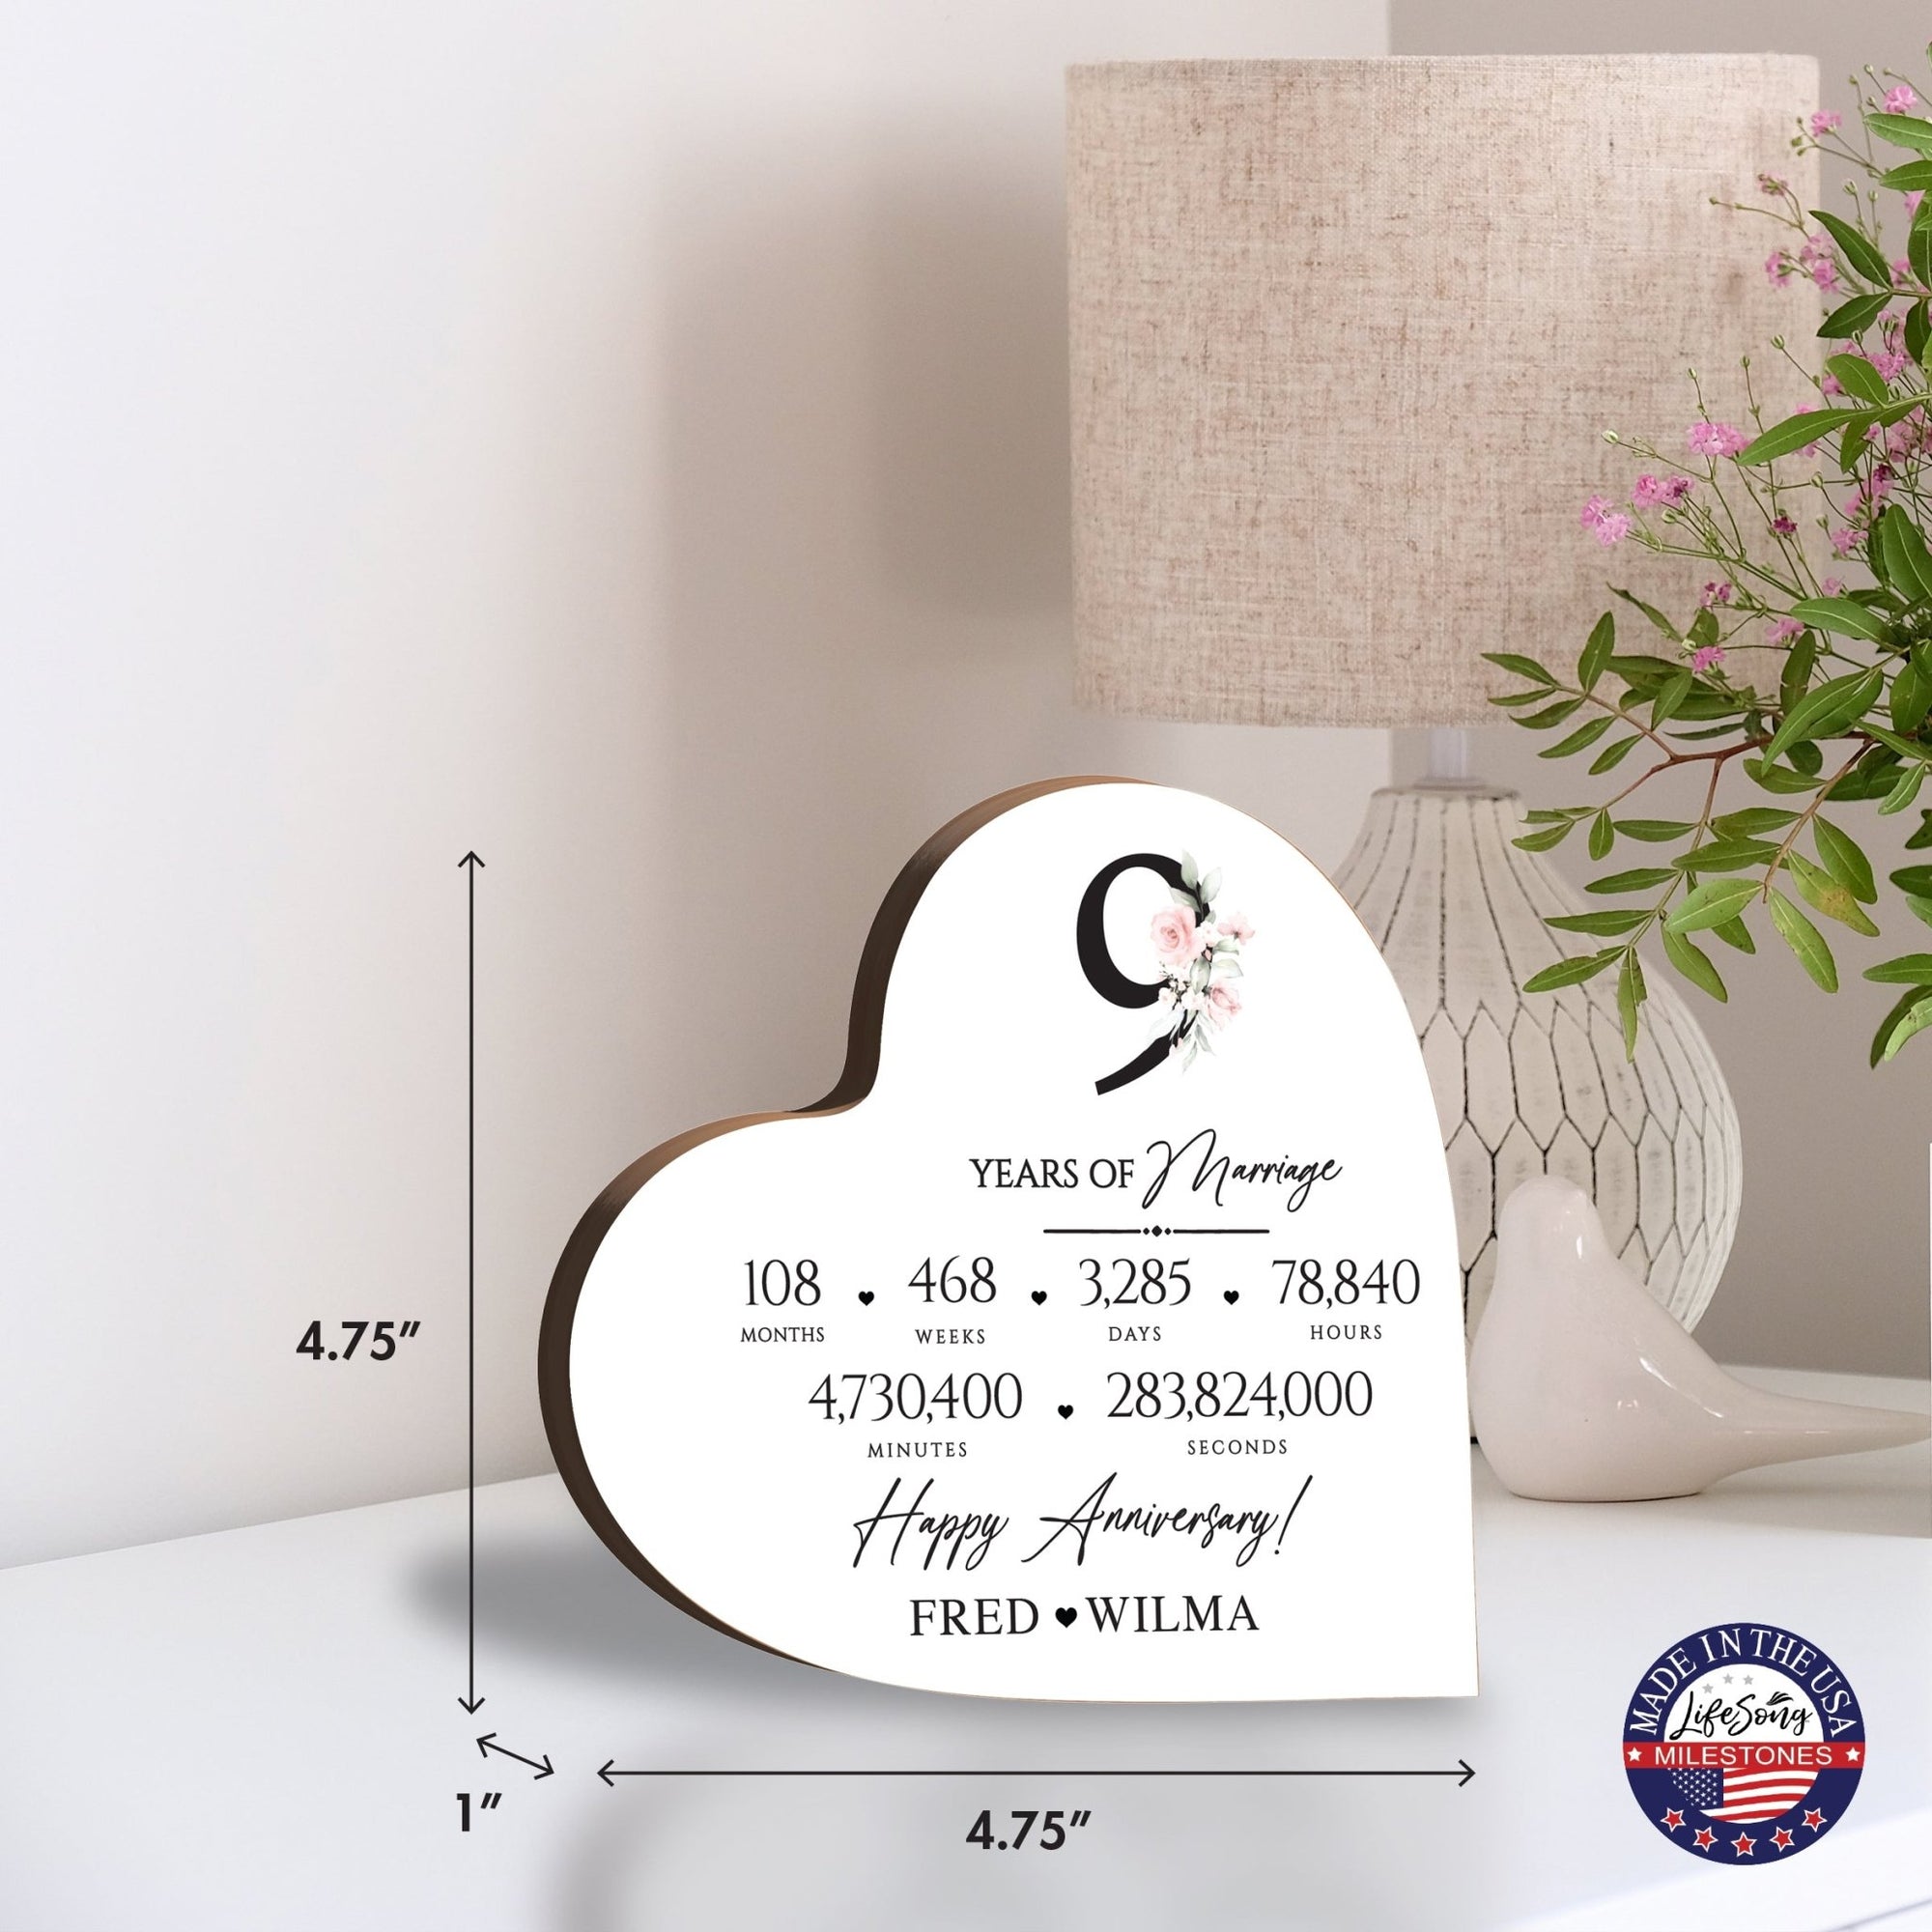 Personalized Wooden Anniversary Heart Shaped Signs - 9th Anniversary - LifeSong Milestones